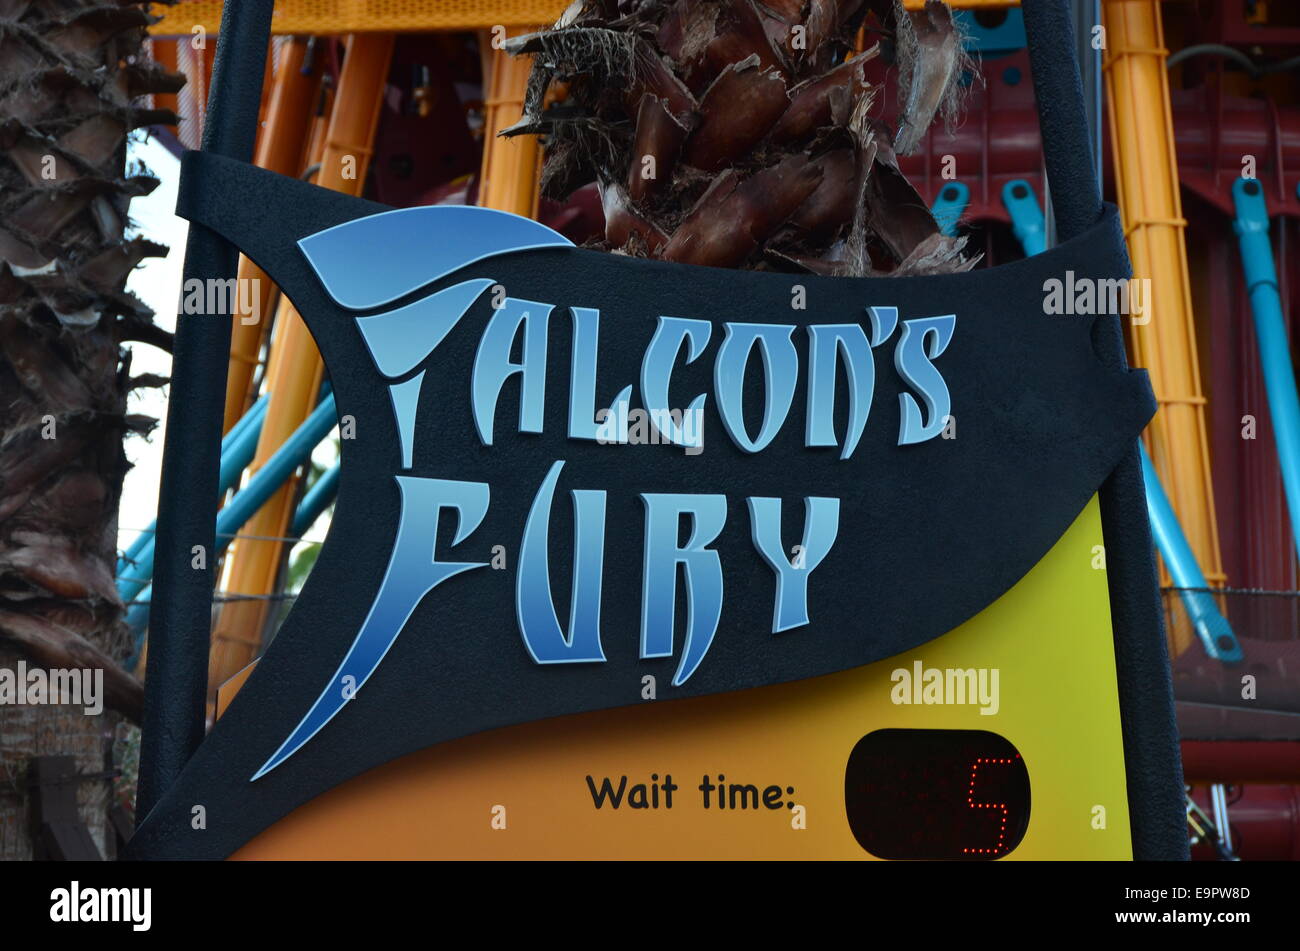 Falcon S Fury A Free Standing Sky Jump Drop Tower Attraction At